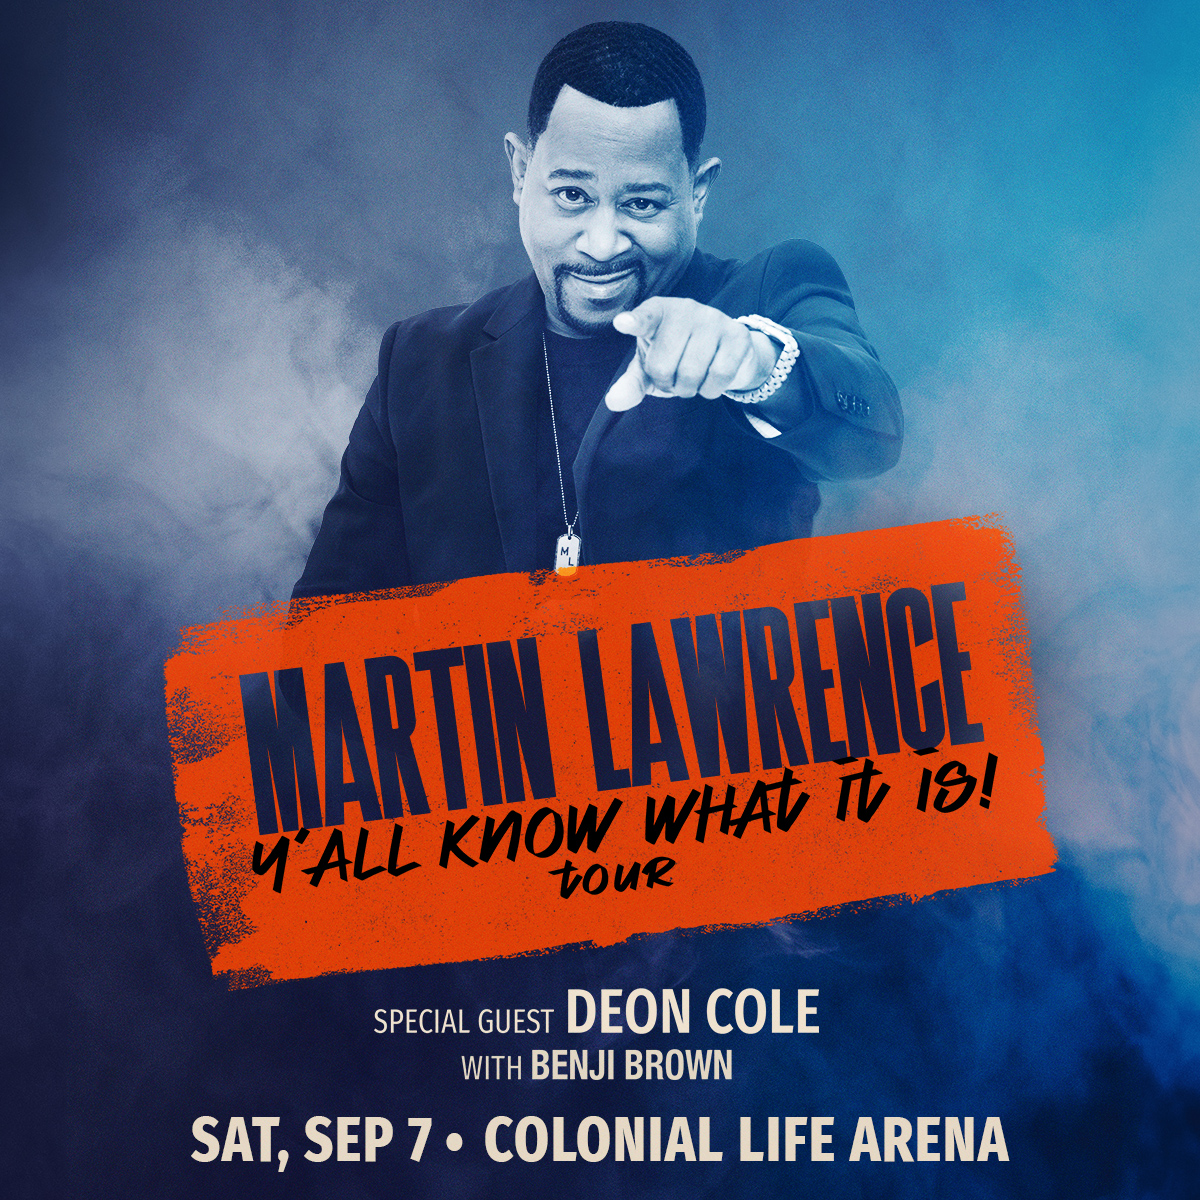 Tickets are on sale now for Martin Lawrence, Y'all Know What It Is! Saturday, September 7. With a full headline set and special guests Deon Cole & Benji Brown. 🎟️: bit.ly/Martin24Cola